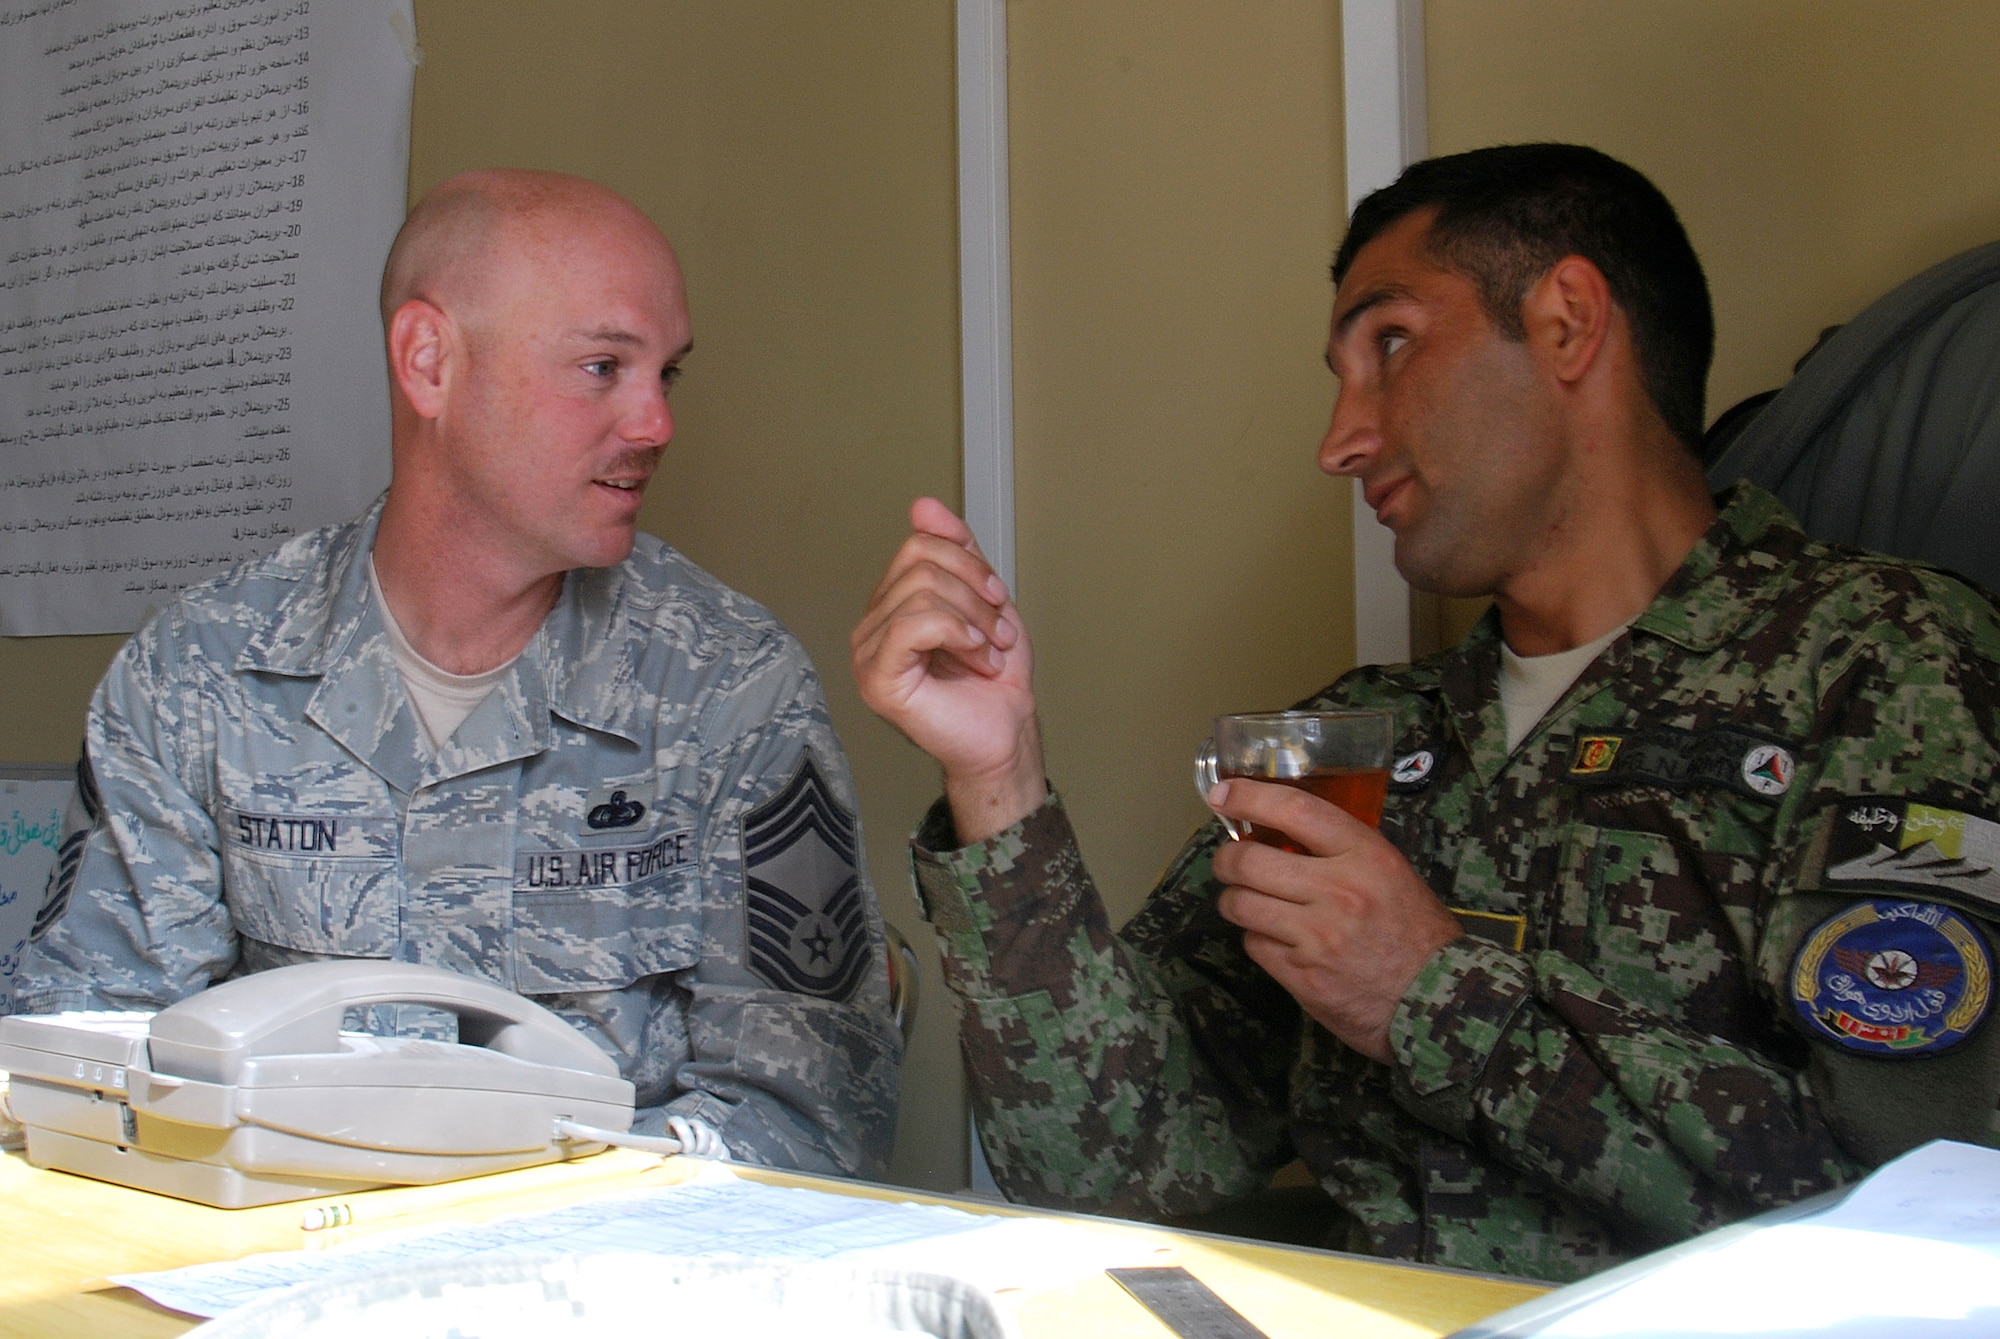 Chief Master Sgt. Dave Staton and Afghan Air Force Command Sgt. Maj. Mohammad Hassan talk during a meeting Dec. 1 at Kandahar Airfield, Afghanistan. Chief Staton is the 738th Air Expeditionary Advisory Group superintendent. As the senior enlisted member, he is also the direct mentor to the Kandahar Air Wing?s enlisted leader, Sergeant Major Hassan. (U.S. Air Force photo by Senior Airman Melissa B. White/Released)